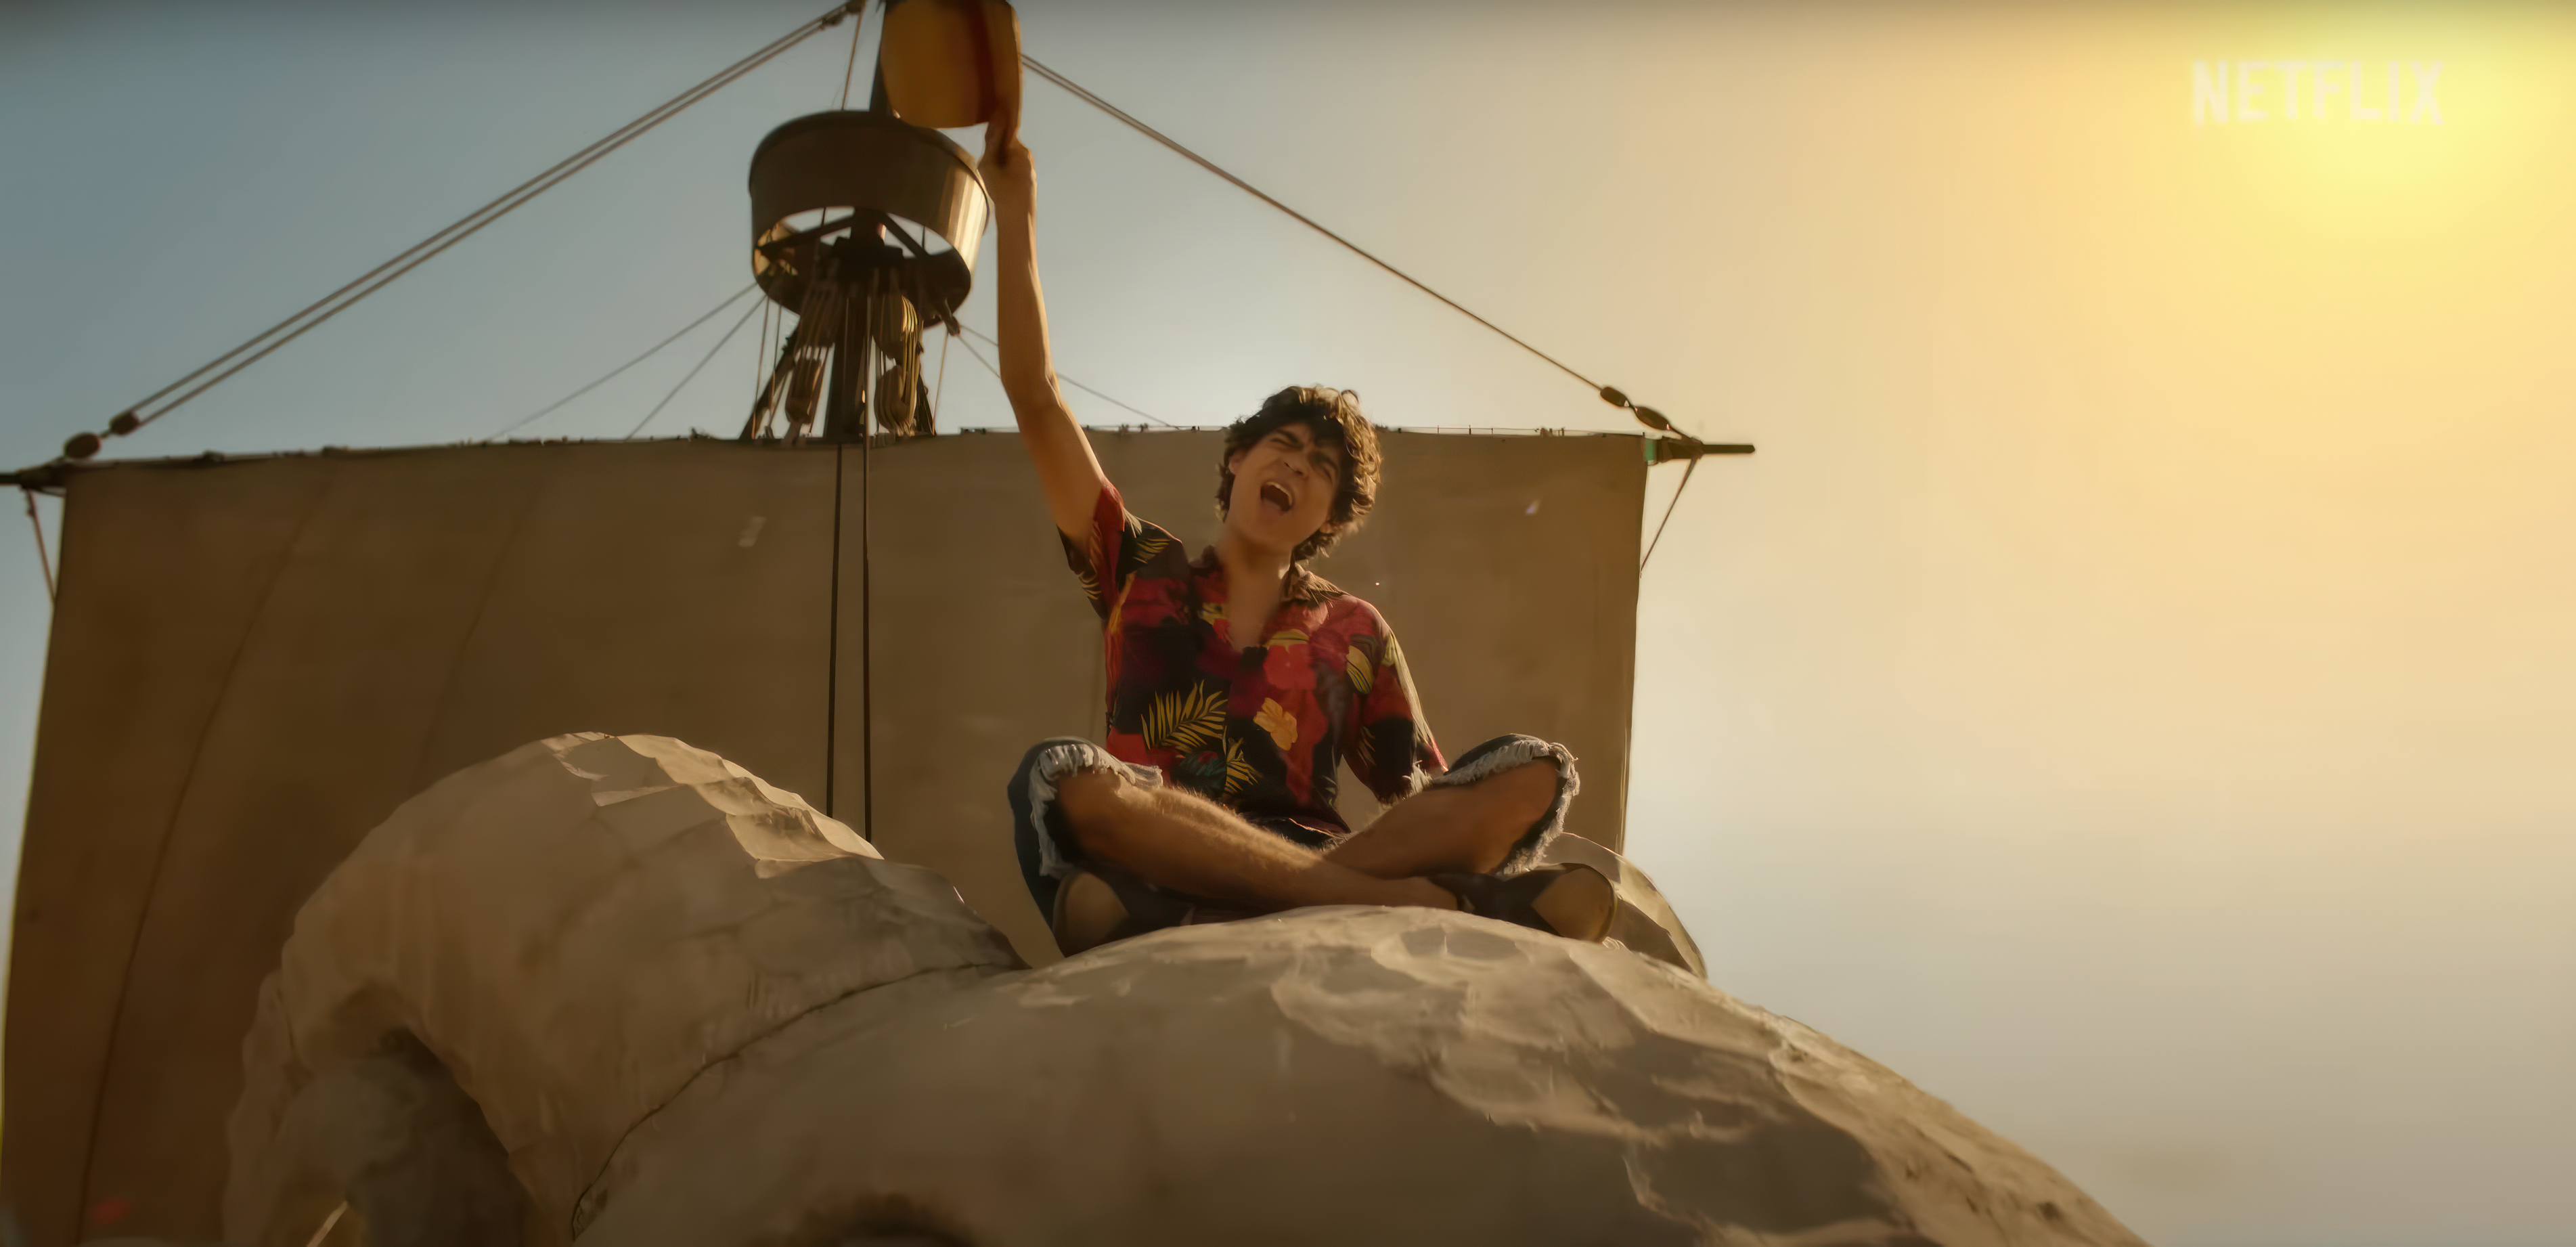 One Piece Netflix Live Action Luffy sitting on the Going Merry